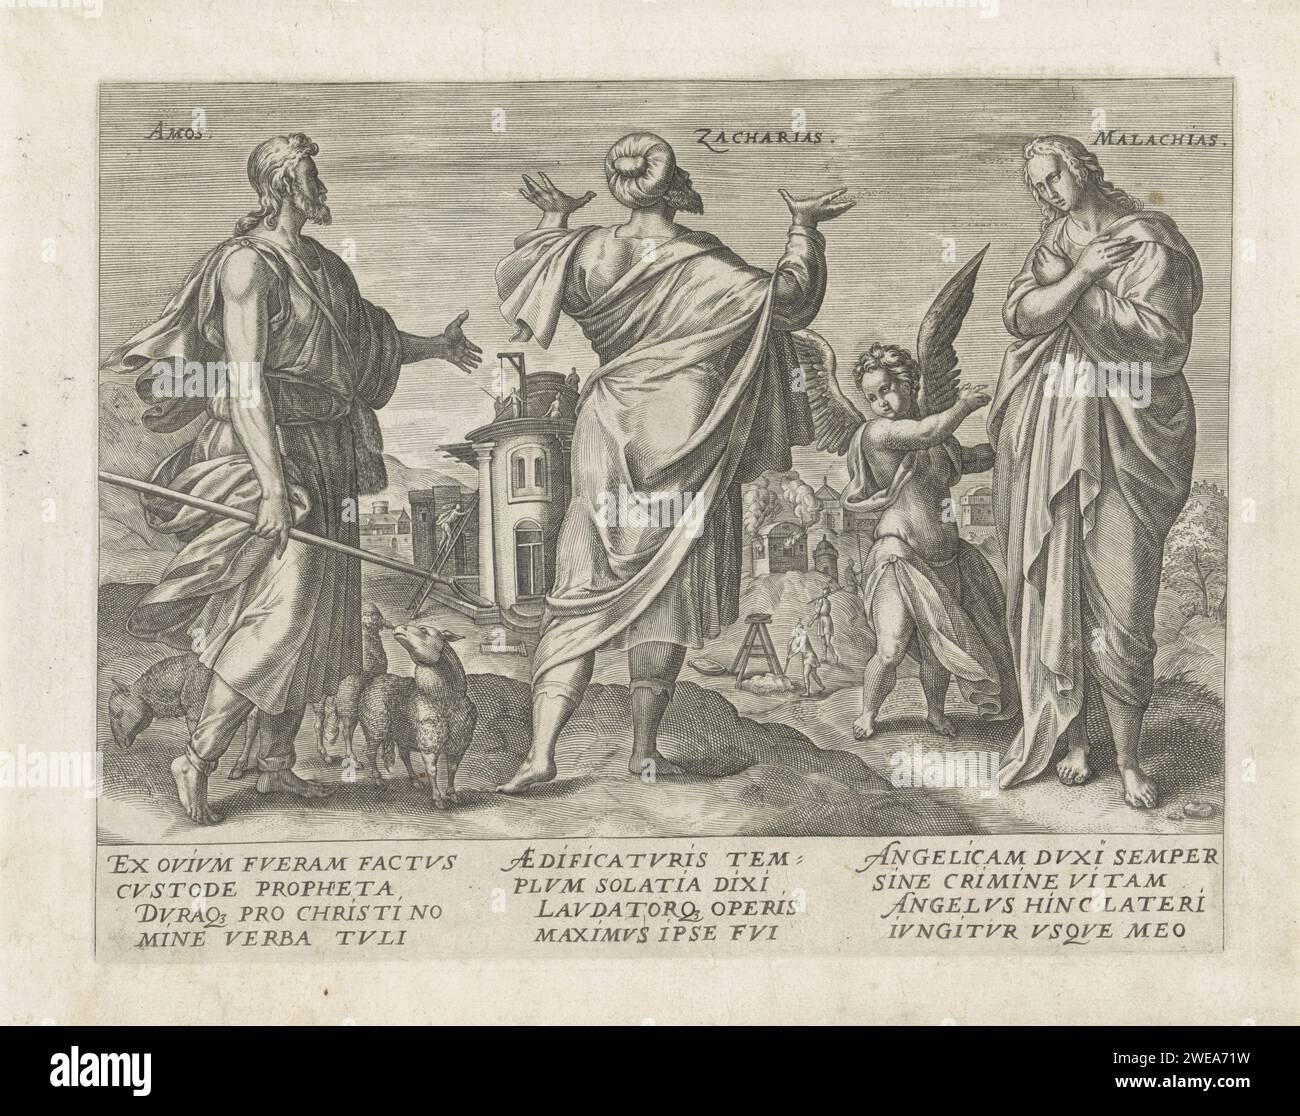 Amos, Zacharia en Maleachi, anonymous, after Jan Snellinck (I), 1585 print The prophets Amos, Zechariah and Malachi stand side by side in a landscape. Amos with shepherds and sheep, Zecharis looks at the landscape in which the temple is rebuilt, Malachi with an angel. Under the performance explanations in Latin. Antwerp paper engraving the four major prophets (not in biblical context): Isaiah, Jeremiah, Ezekiel, Daniel. the book of Amos. the book of Zechariah. the book of Malachi Stock Photo